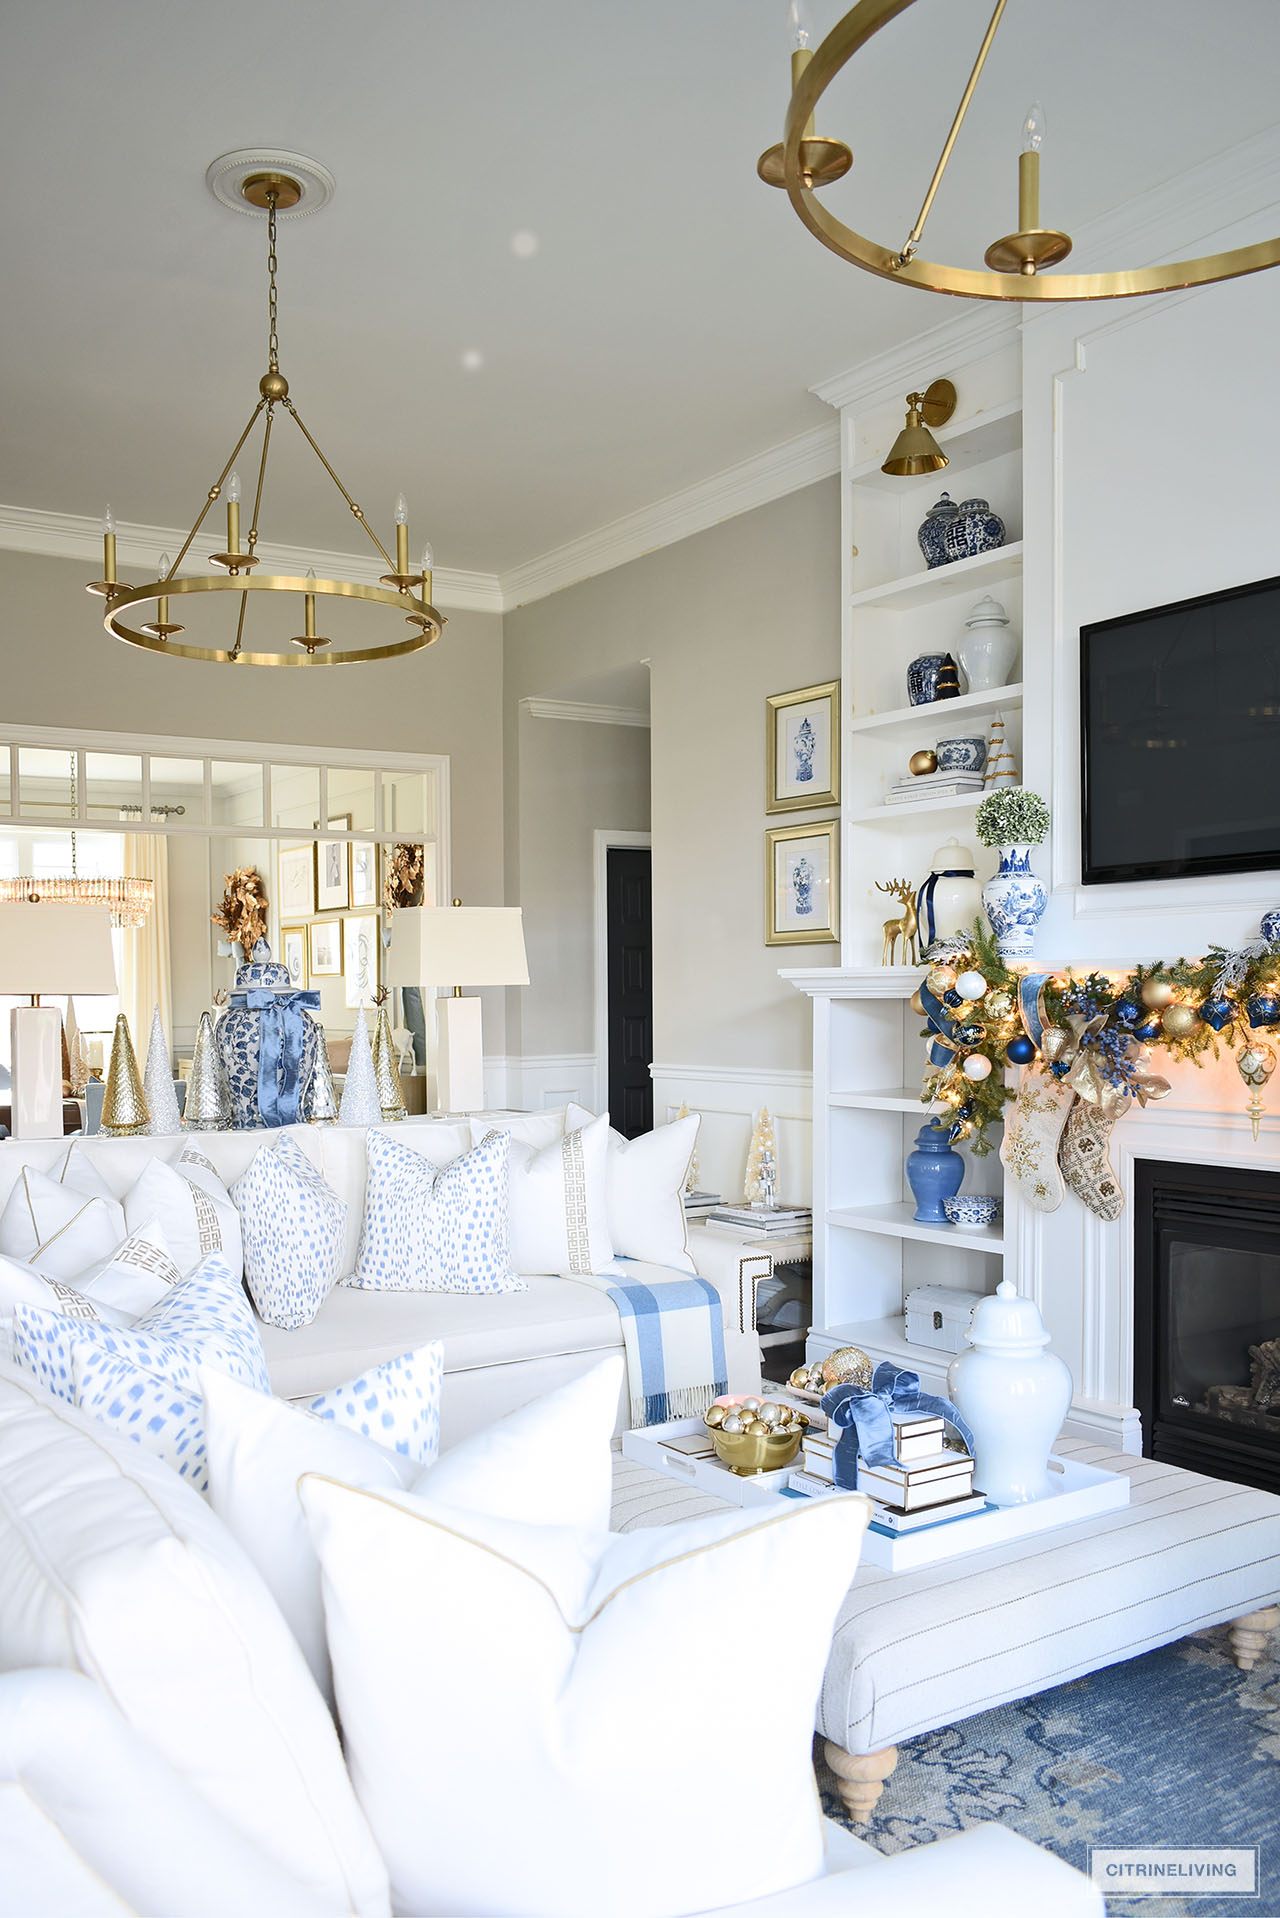 Living room styled for Christmas with white sofas, white, blue and gold pillows, garland with blue and gold ornaments and ribbon.